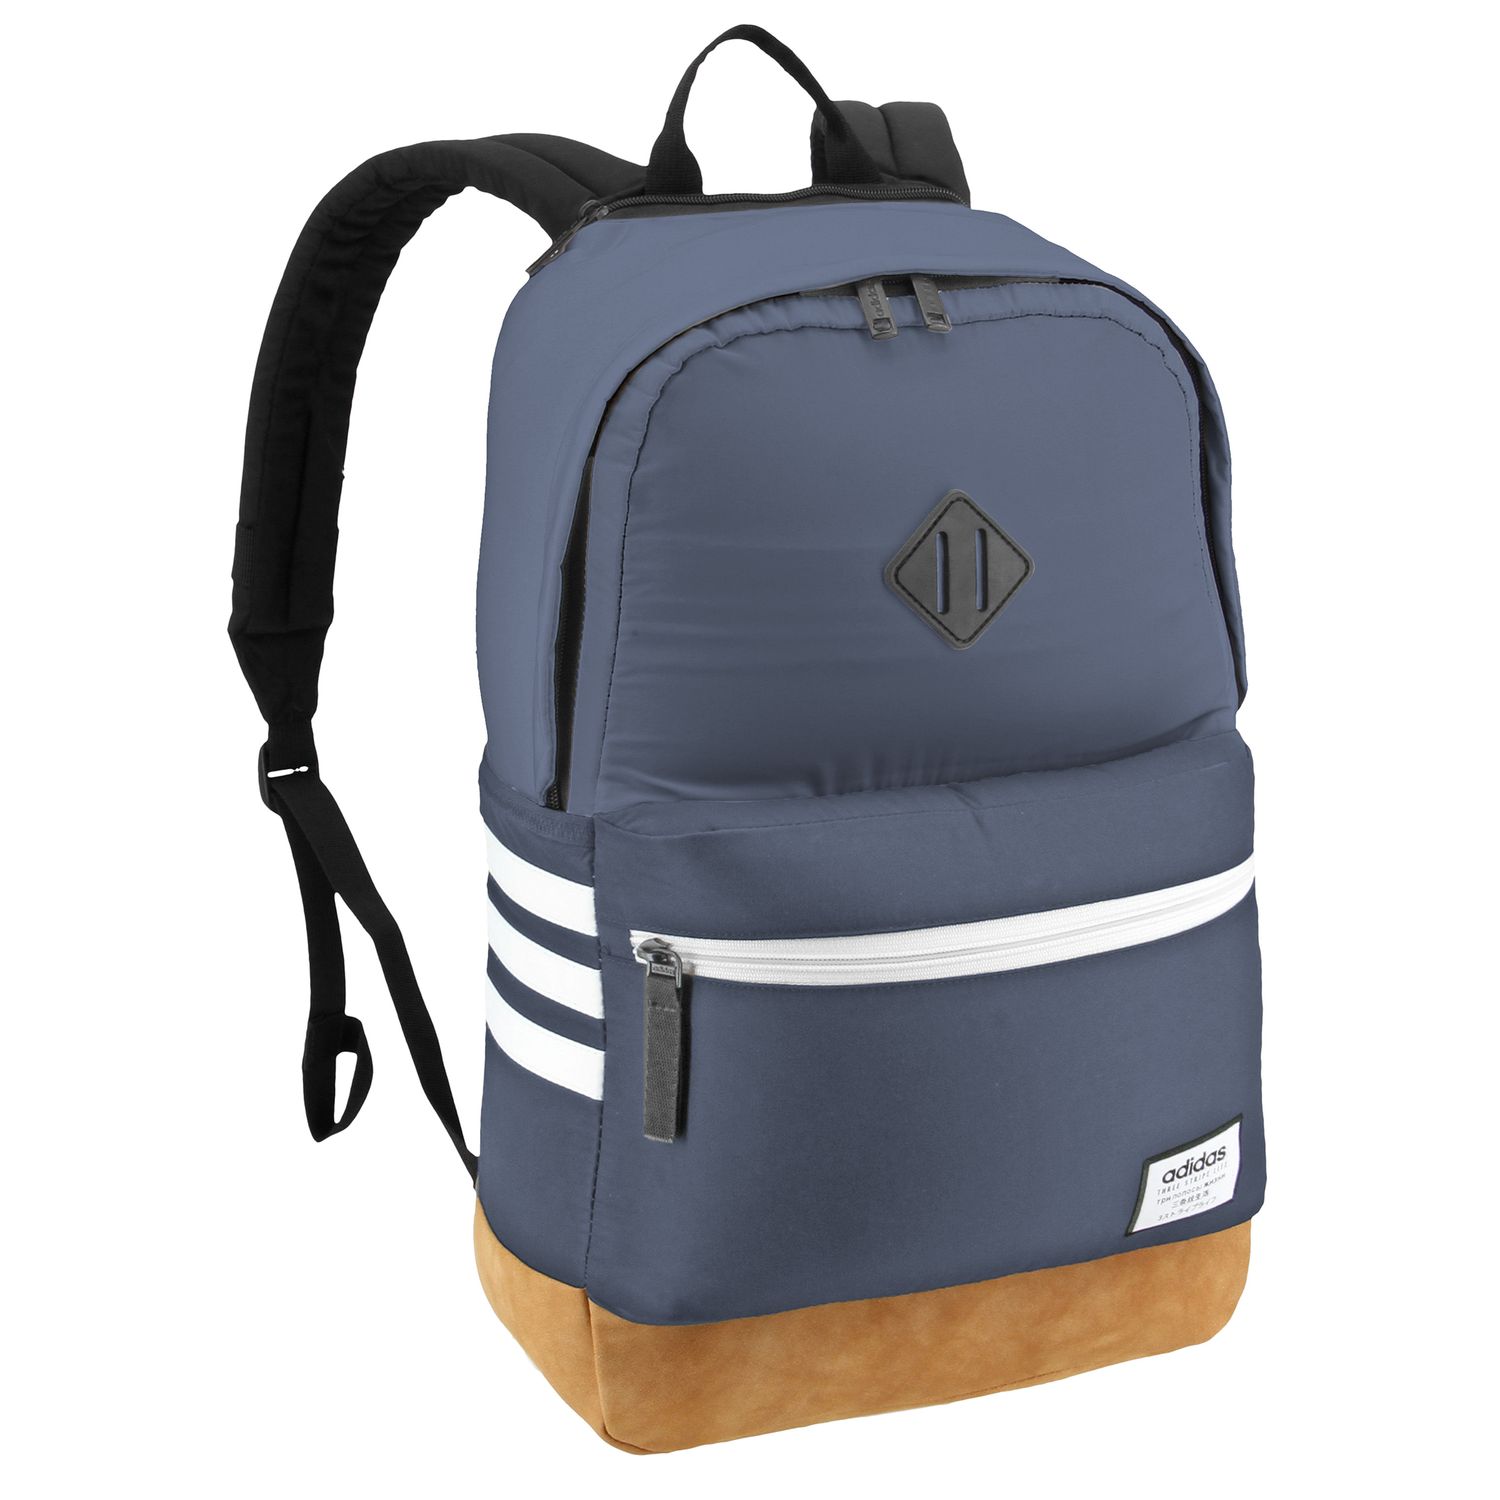 adidas classic backpack 3s